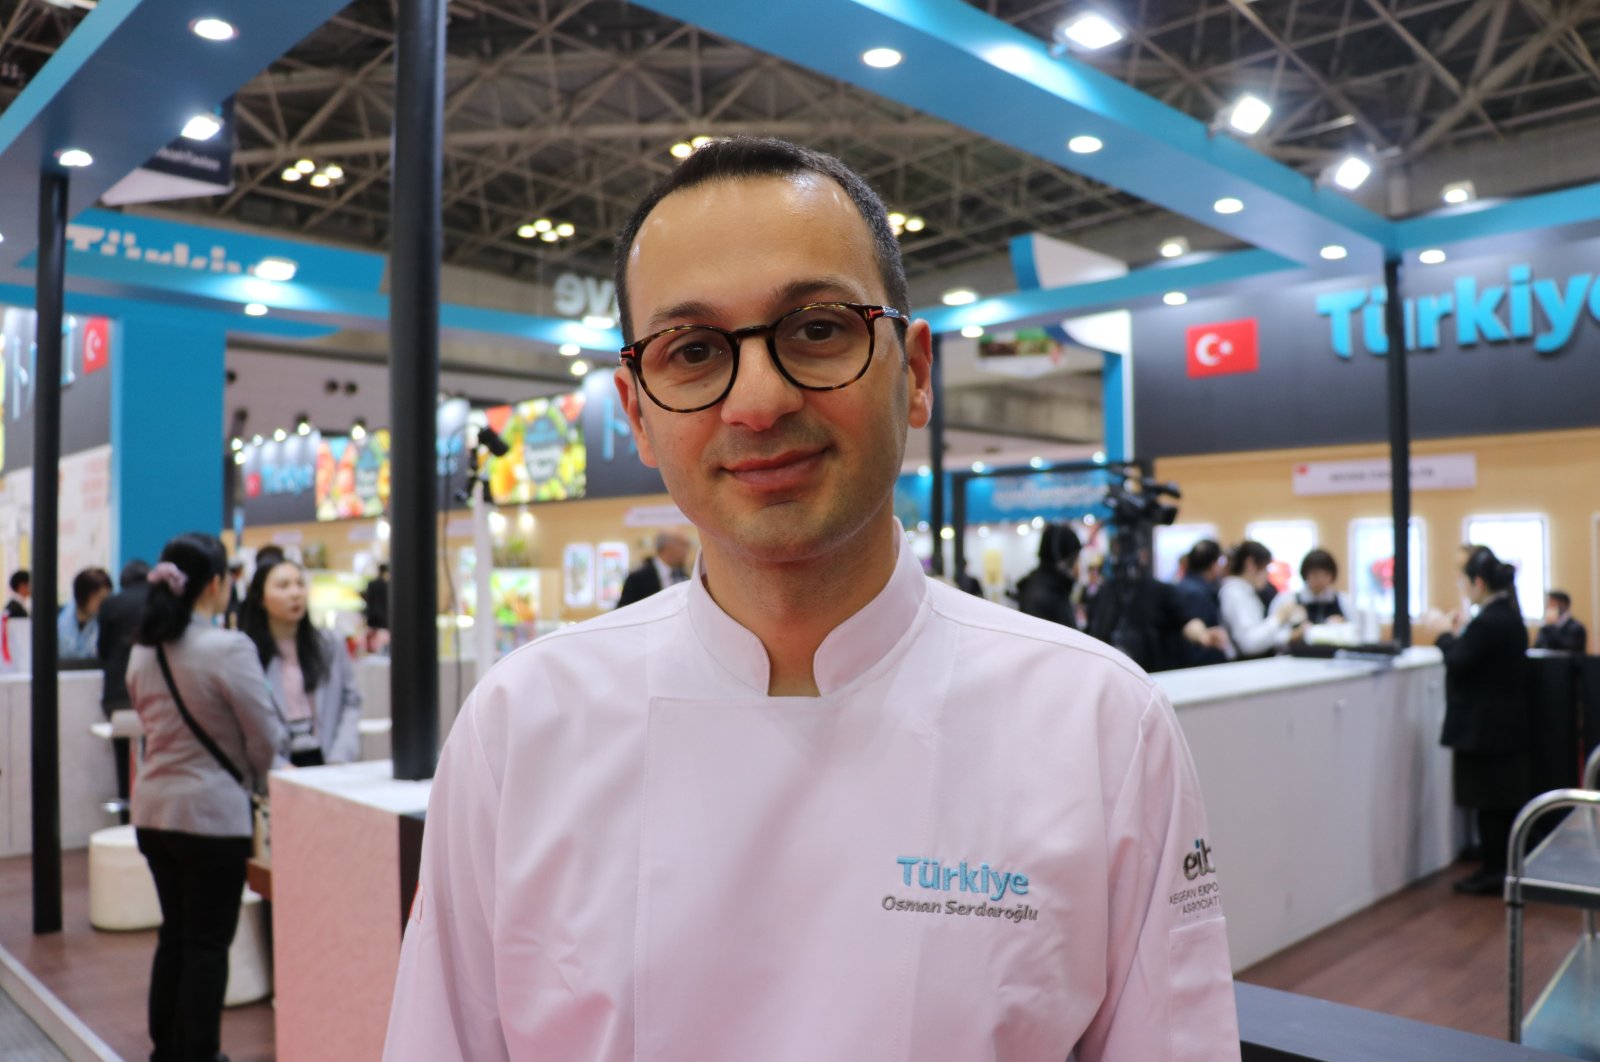 Osman Serdaroğlu showcased skills he learned from a Japanese master during his five-year gastronomy education in Italy, Tokyo, Japan. March, 12, 2024.